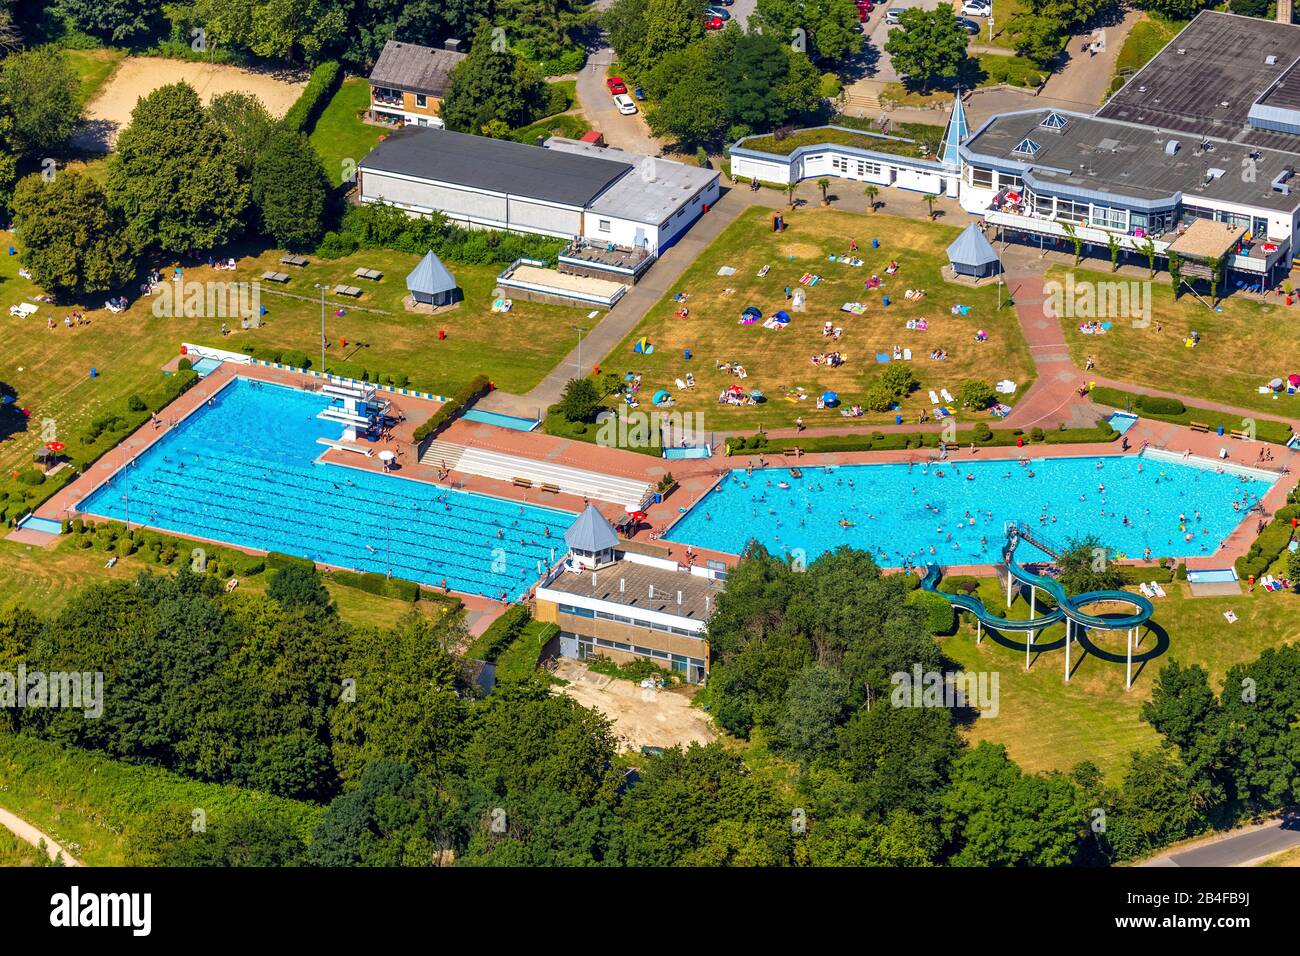 Aerial view of the outdoor swimming pool and public swimming pool HeljensBad with swimmer pool, lap pool and sunbathing areas in Heiligenhaus in the Ruhr area in the federal state of North Rhine-Westphalia in Germany, Stock Photo